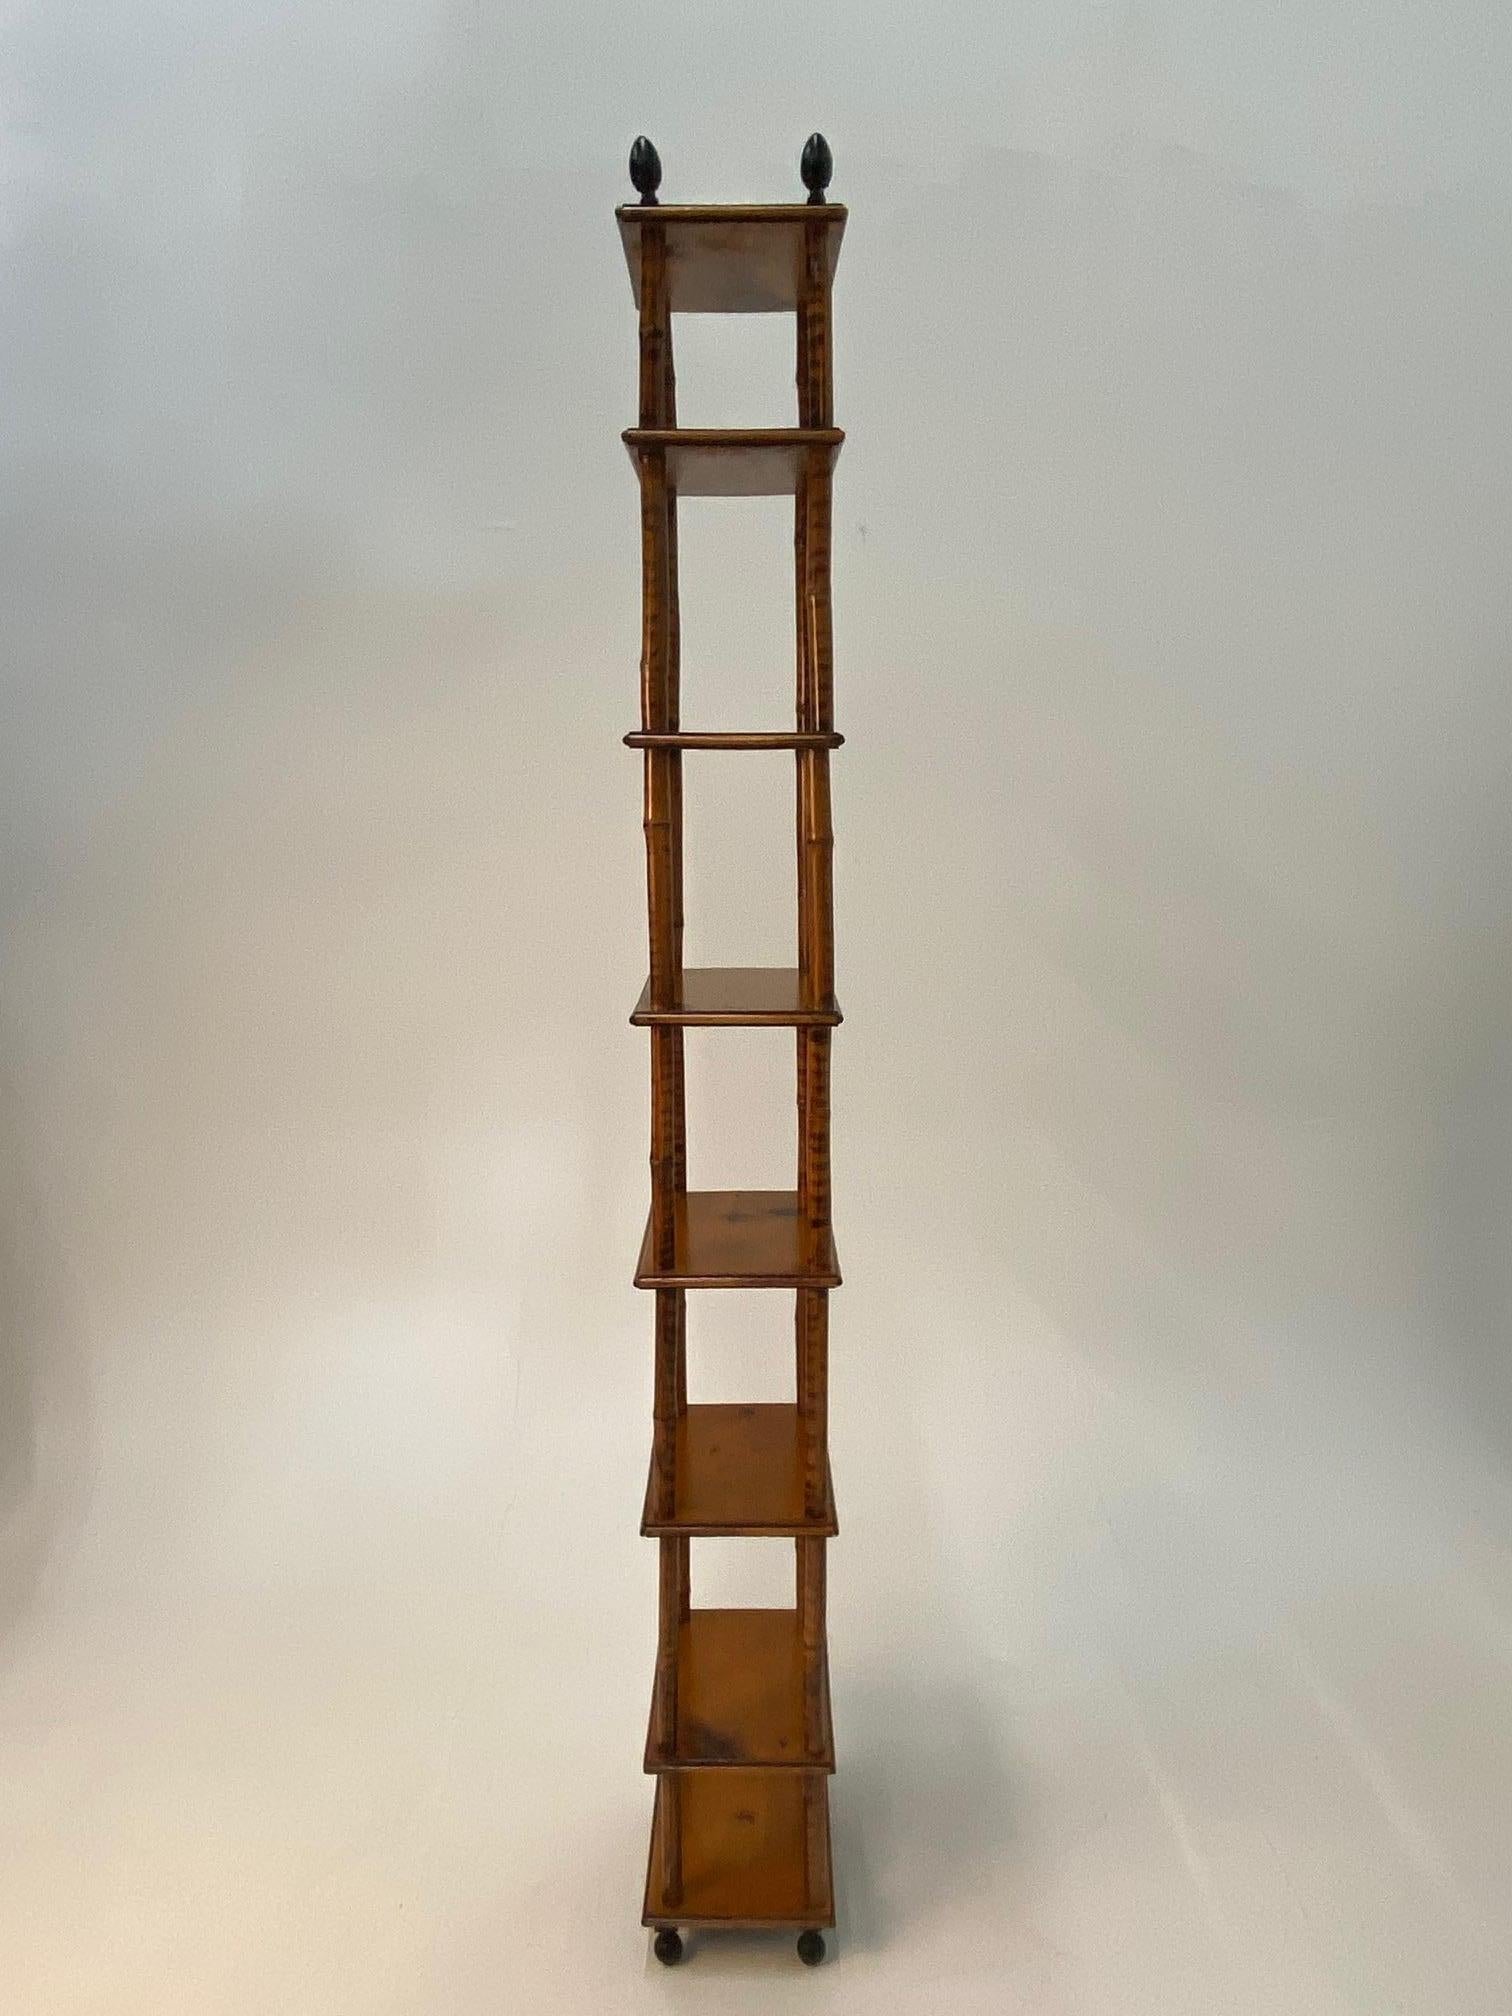 An elegant very tall antique etagere constructed of bamboo rods having 8 wooden shelves with decorative iron finials at the top and iron ball feet. Top and bottom shelves are 8